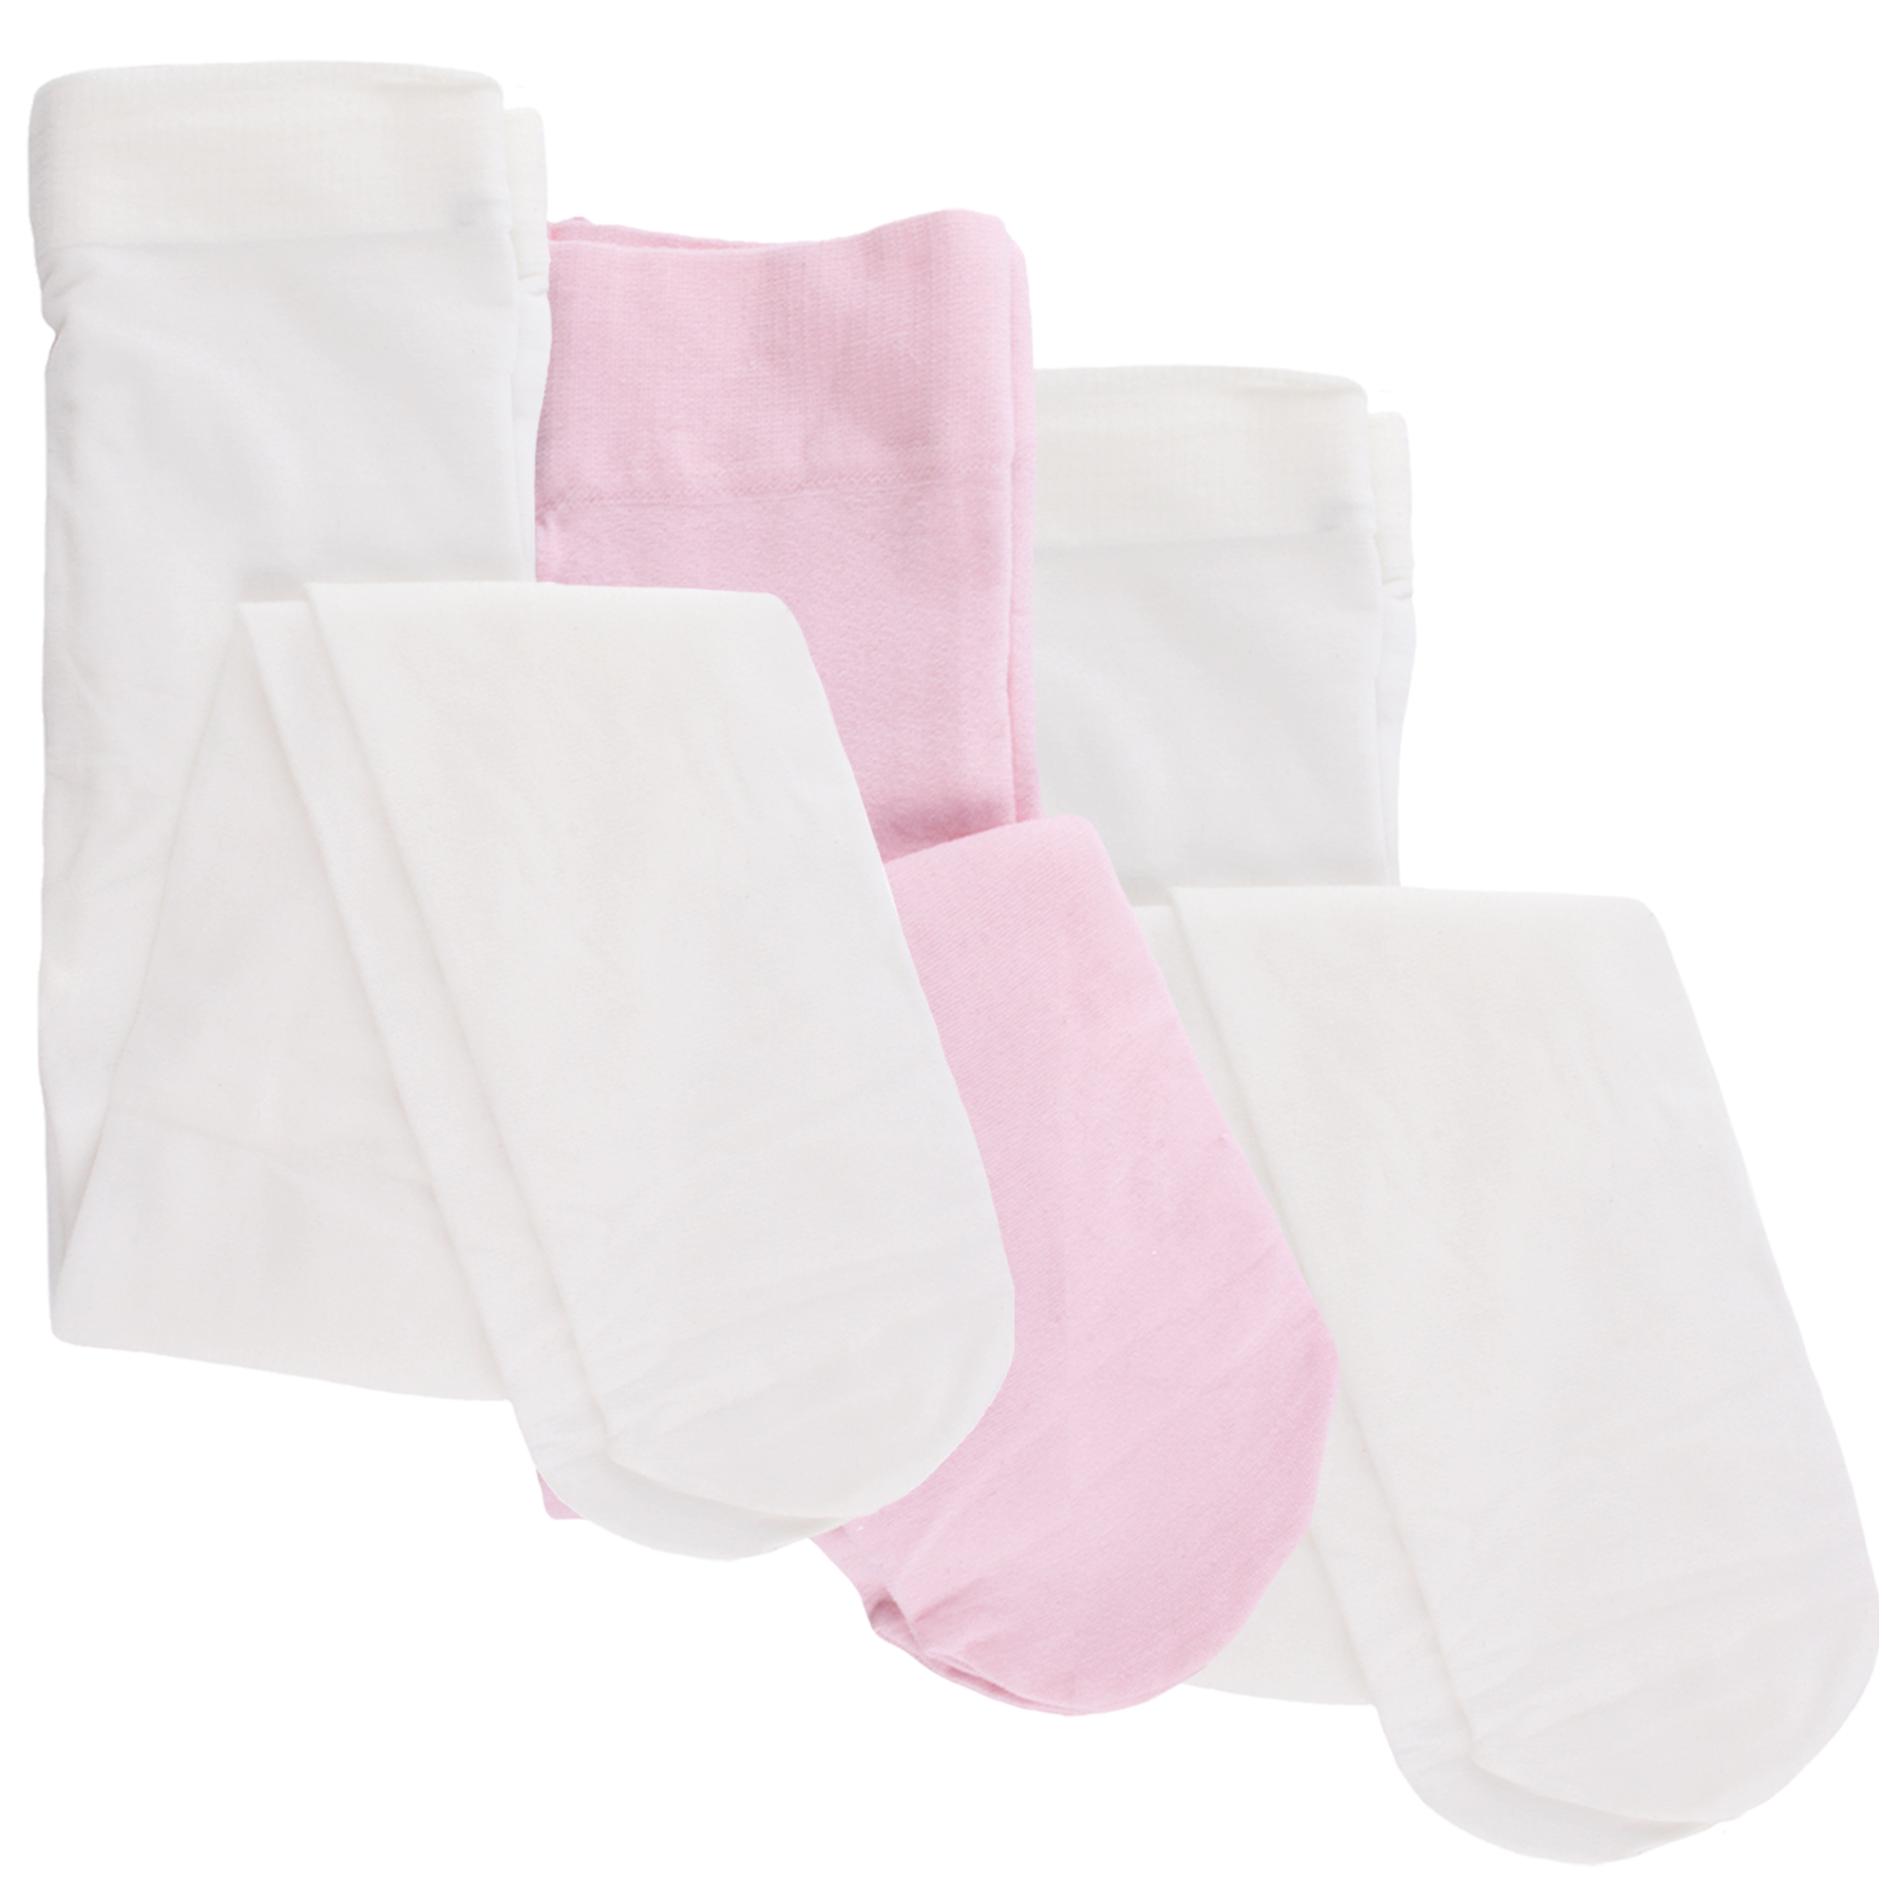 Little Wonders Infant Girl's 3-Pairs Tights